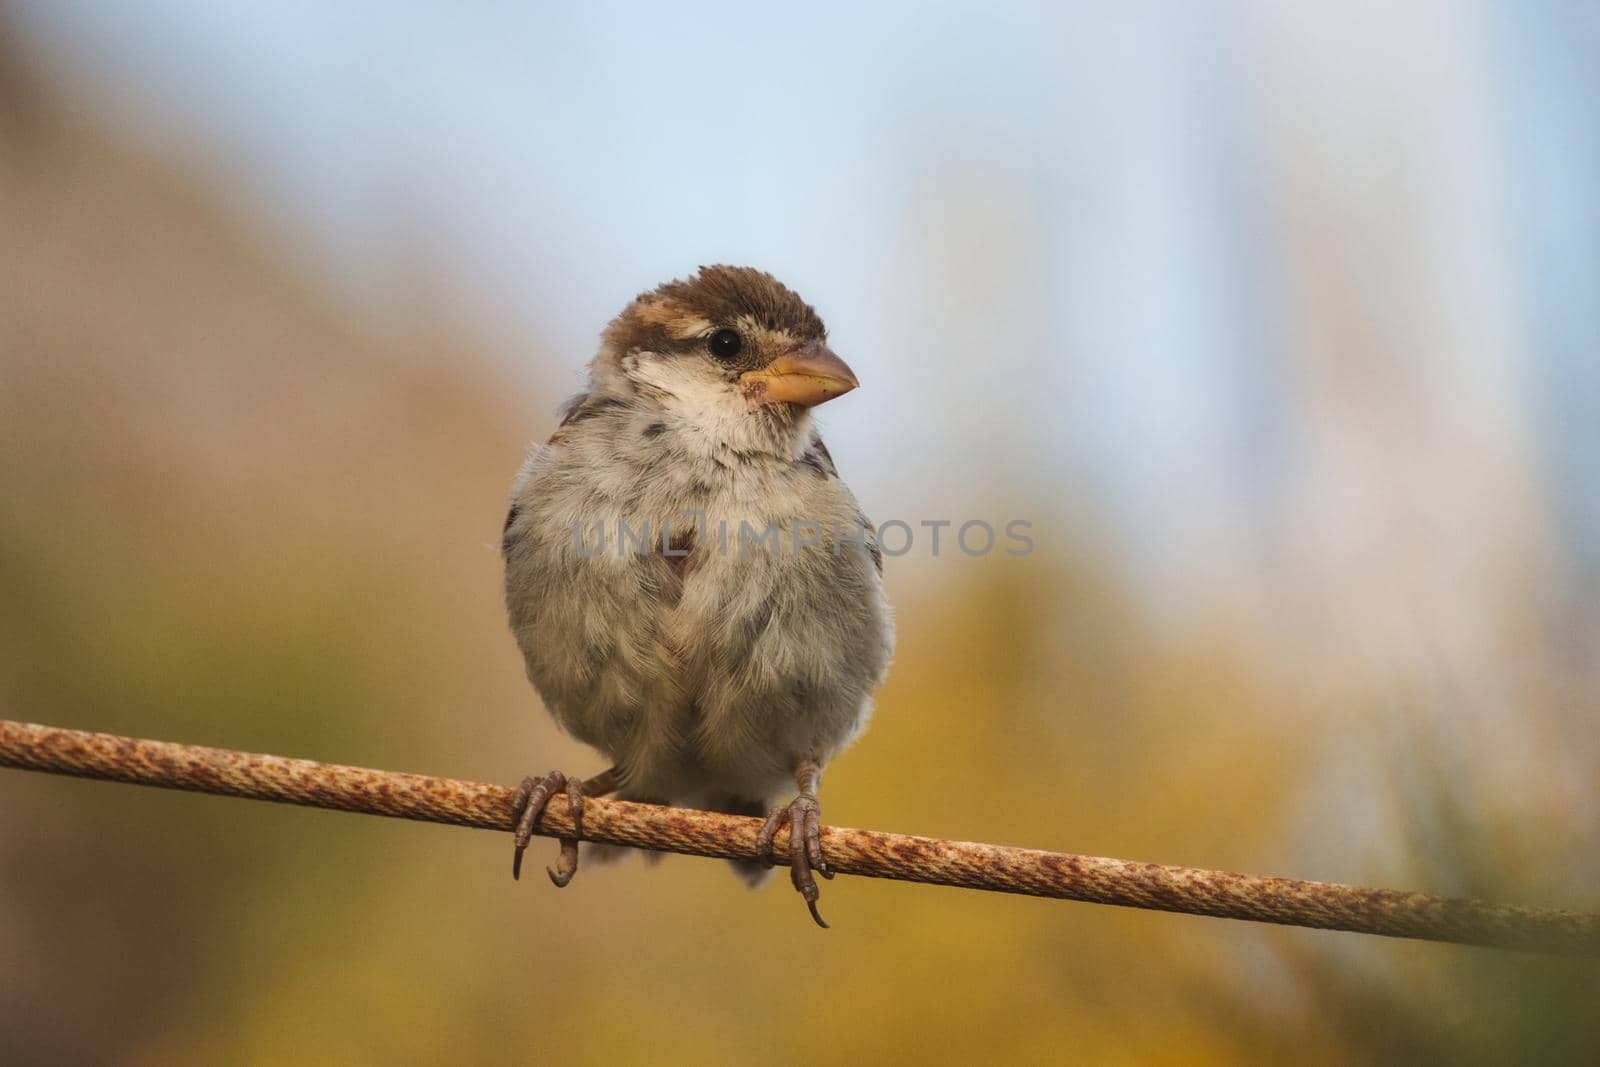 Sparrow perched on a wire in the countryside with a blurred background by tennesseewitney